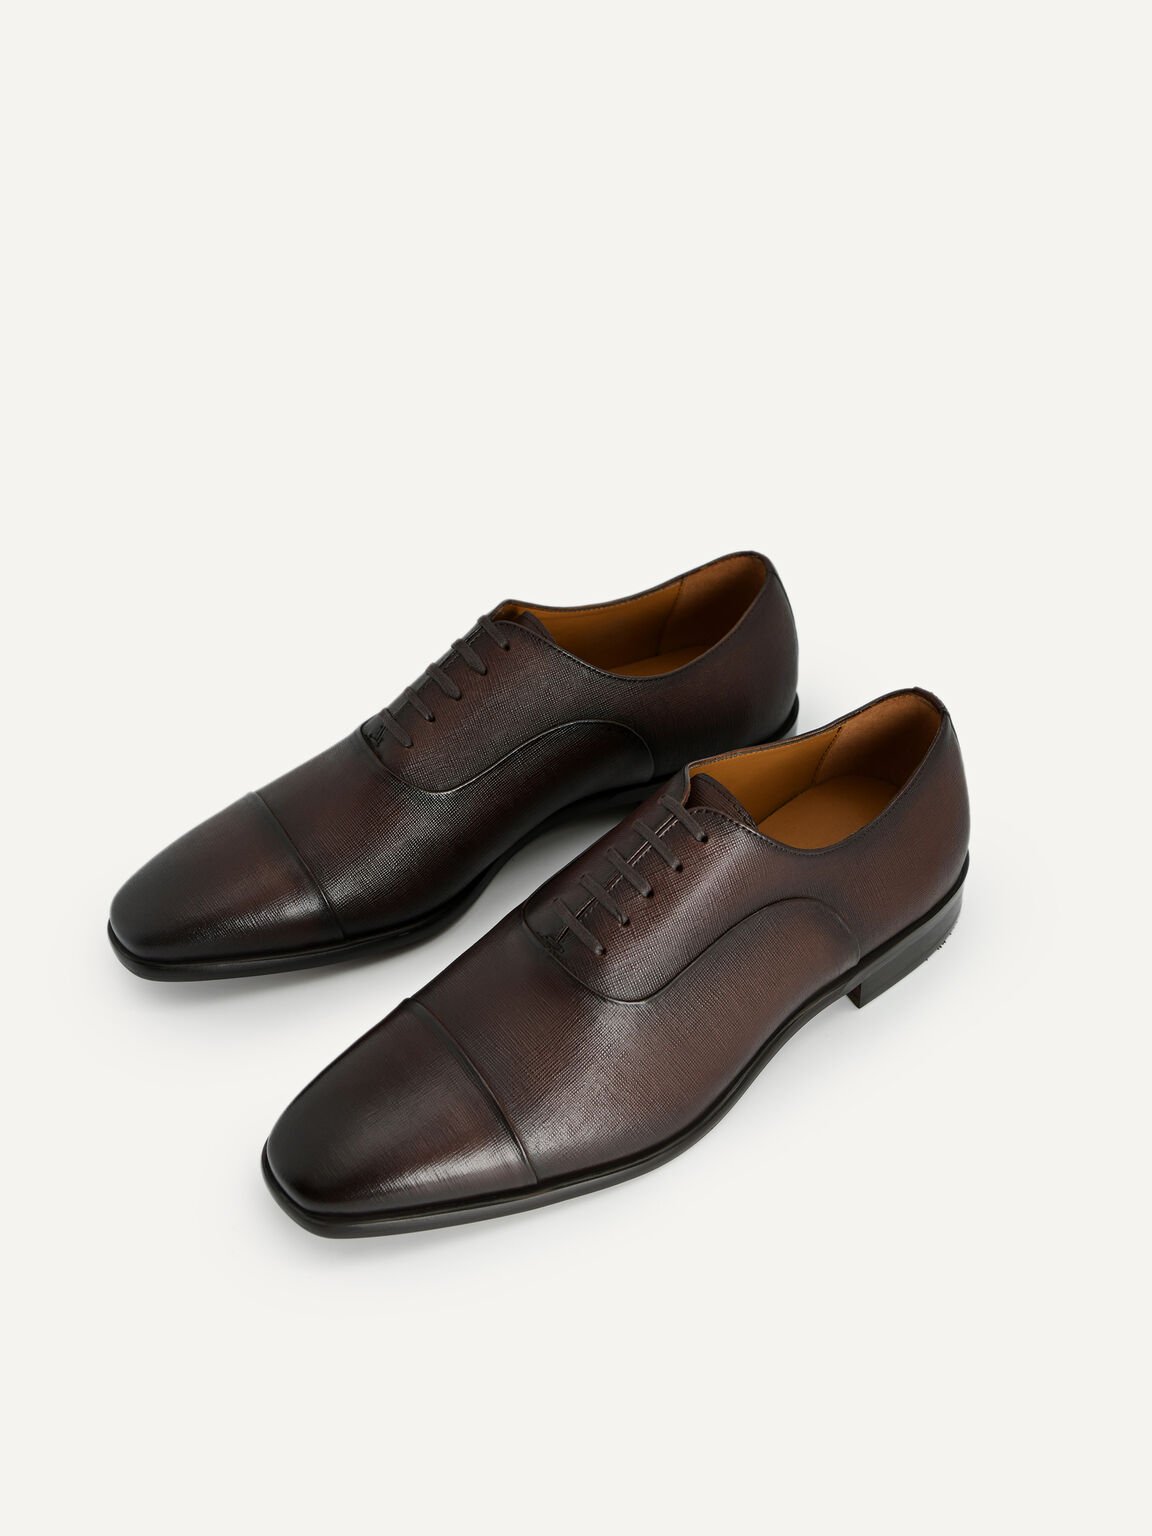 Textured Leather Oxford Shoes, Brown, hi-res